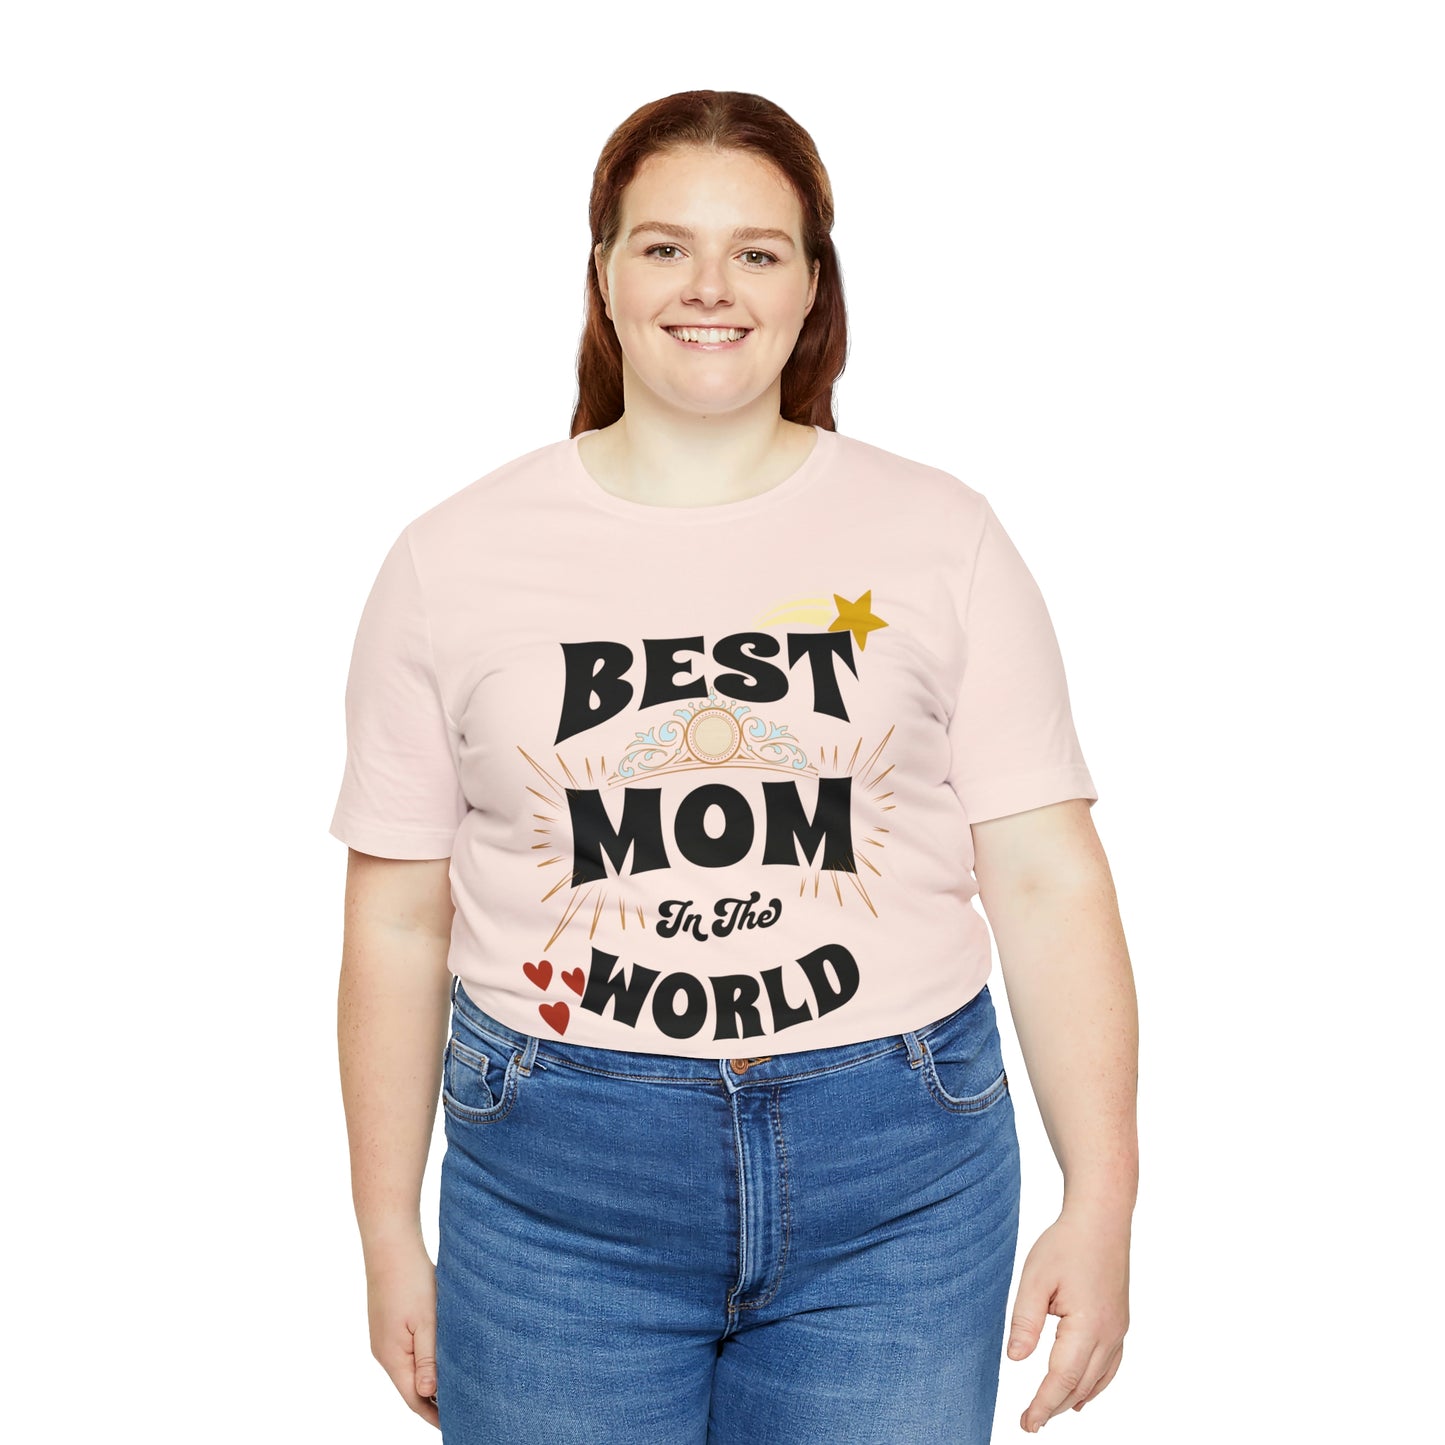 Unisex Jersey Short Sleeve Tee, Best Mom in the World Gift